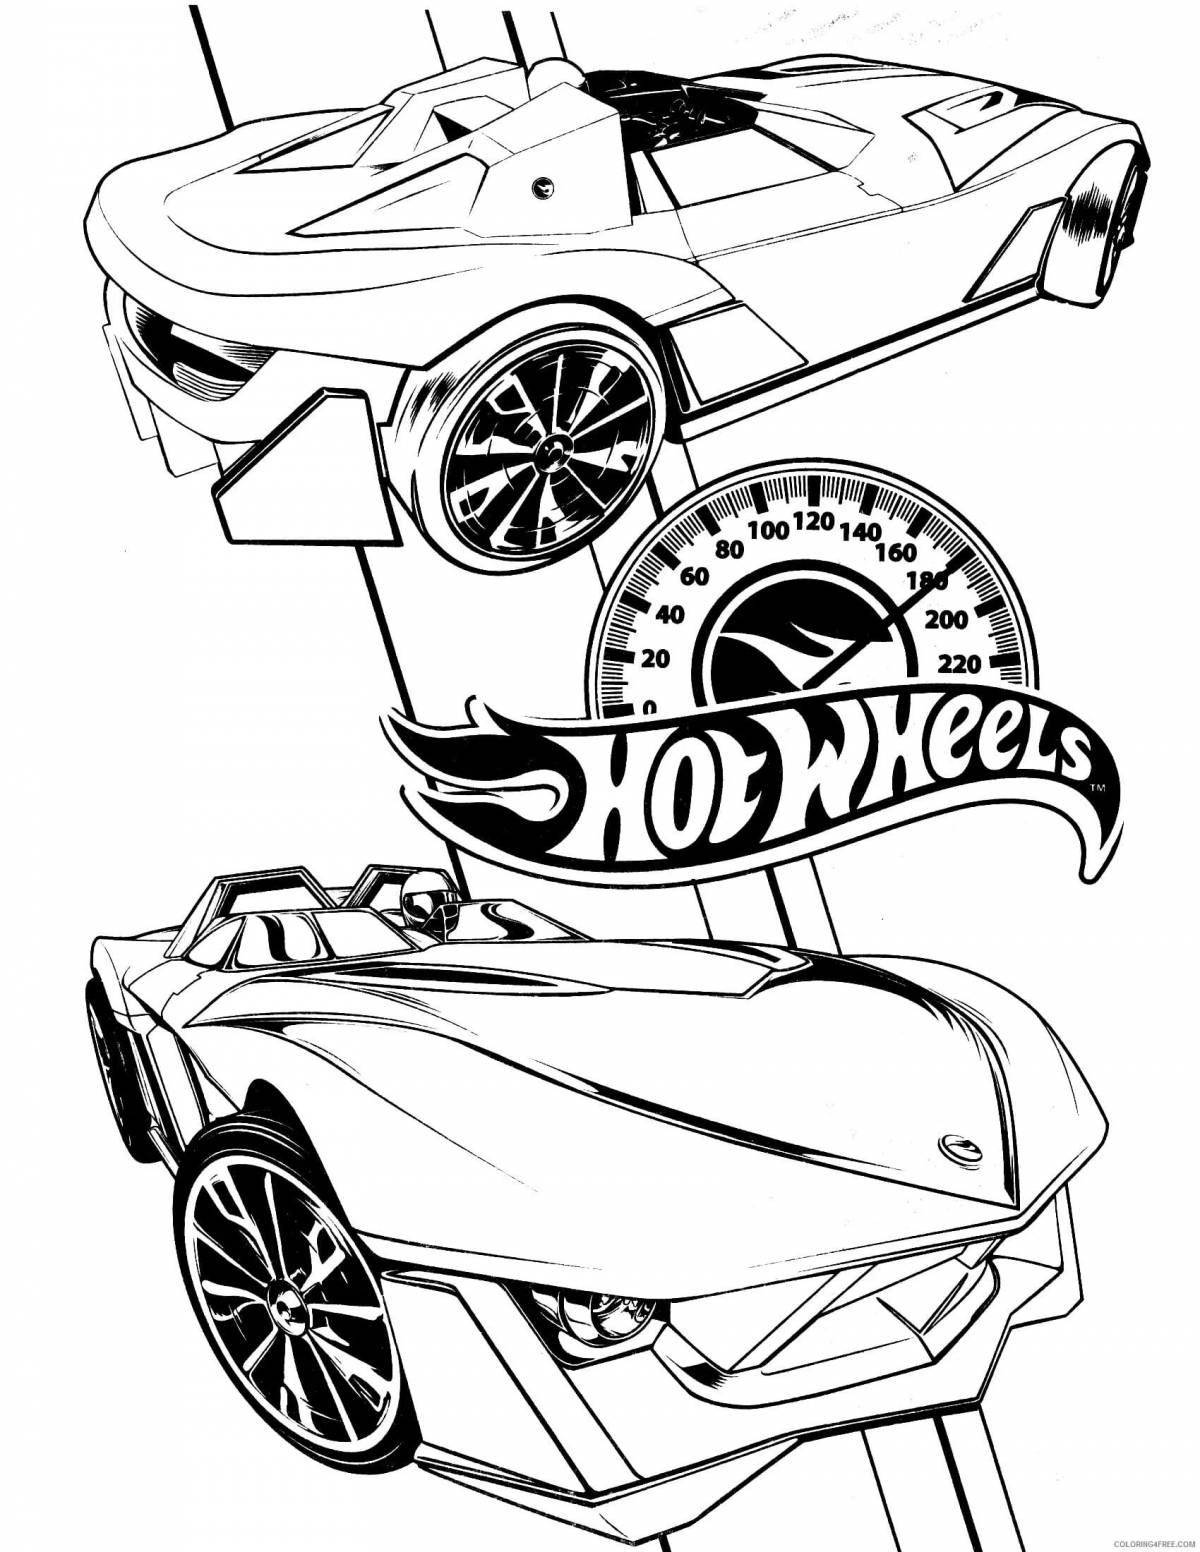 Exotic hot wheels coloring book for boys